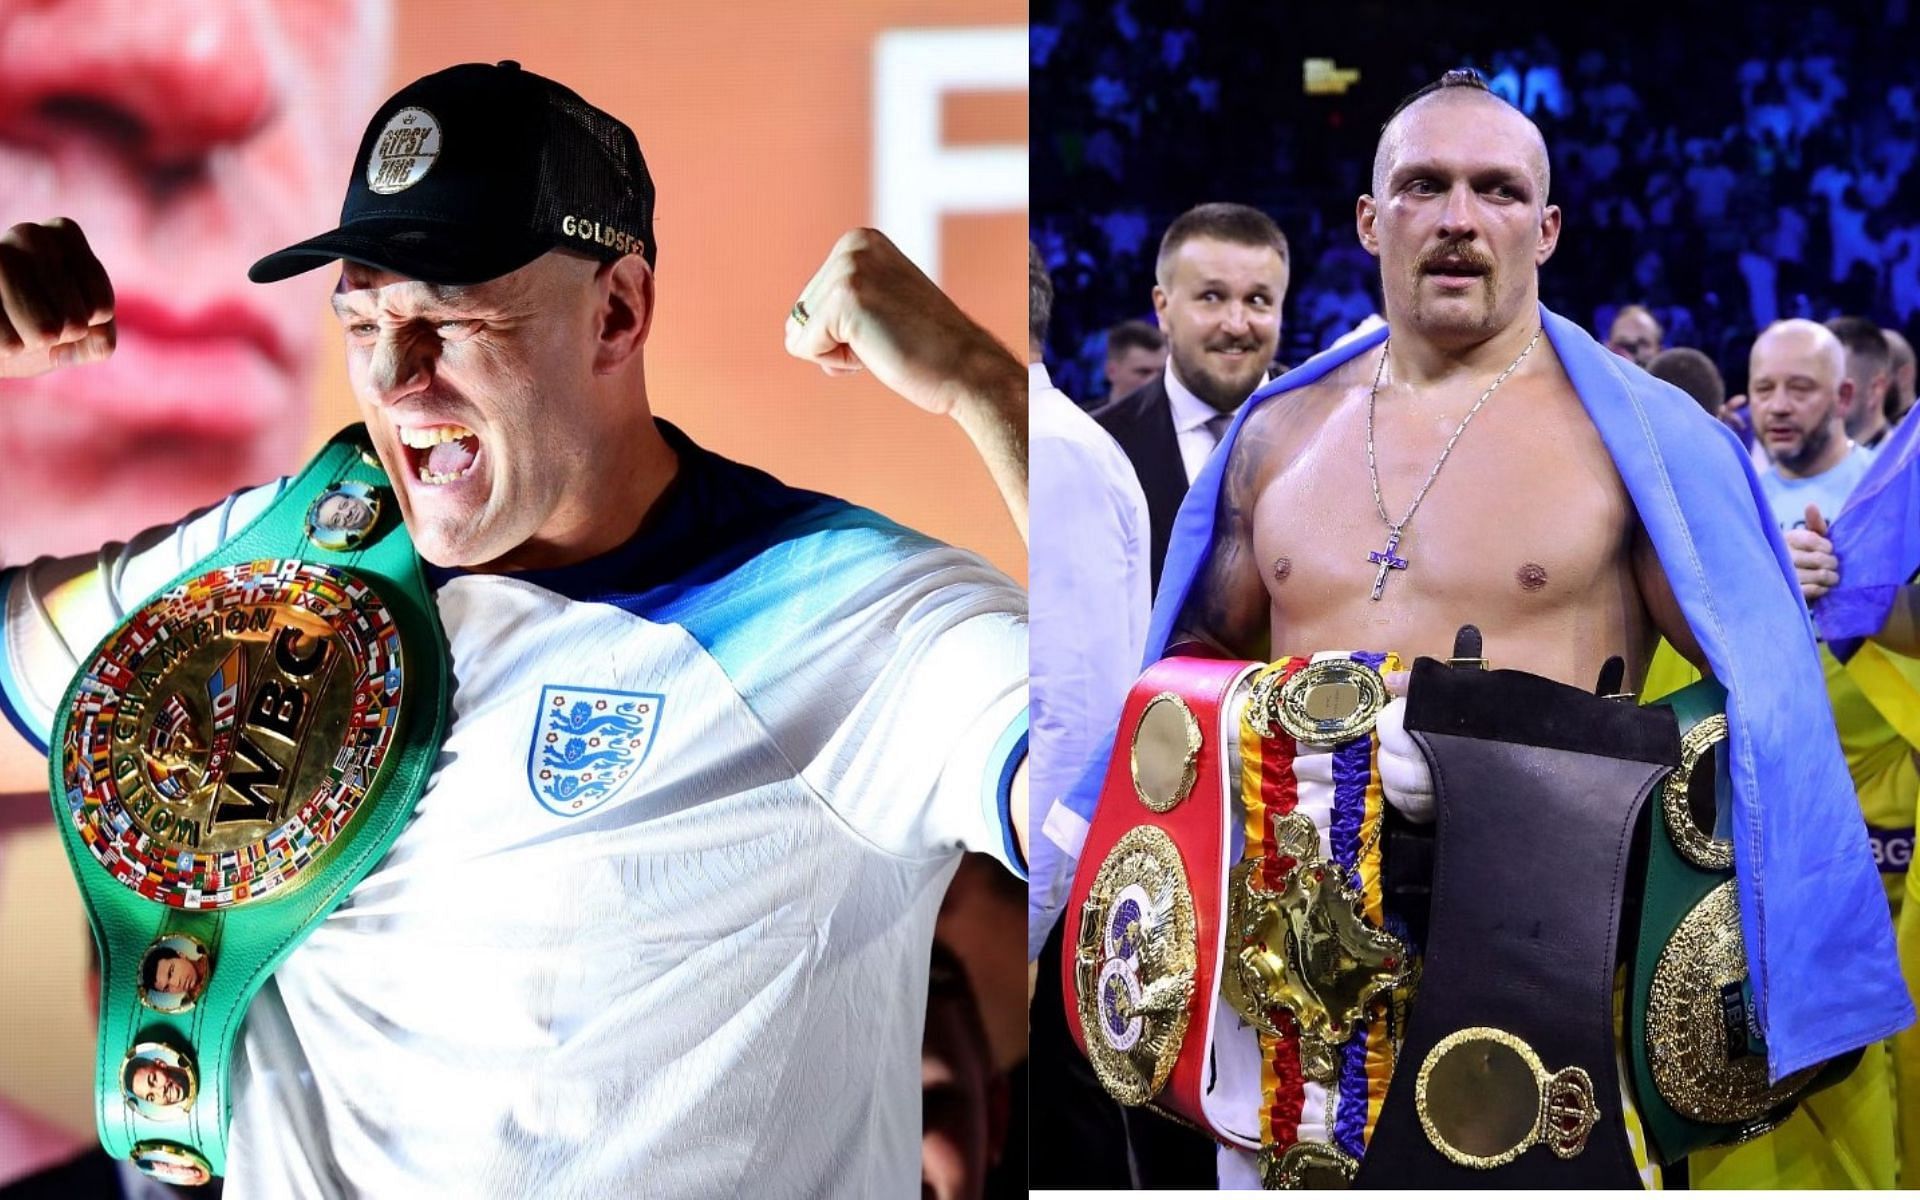 Tyson Fury (Left) and Oleksandr Usyk (Right) (Image Credits; Getty Images)